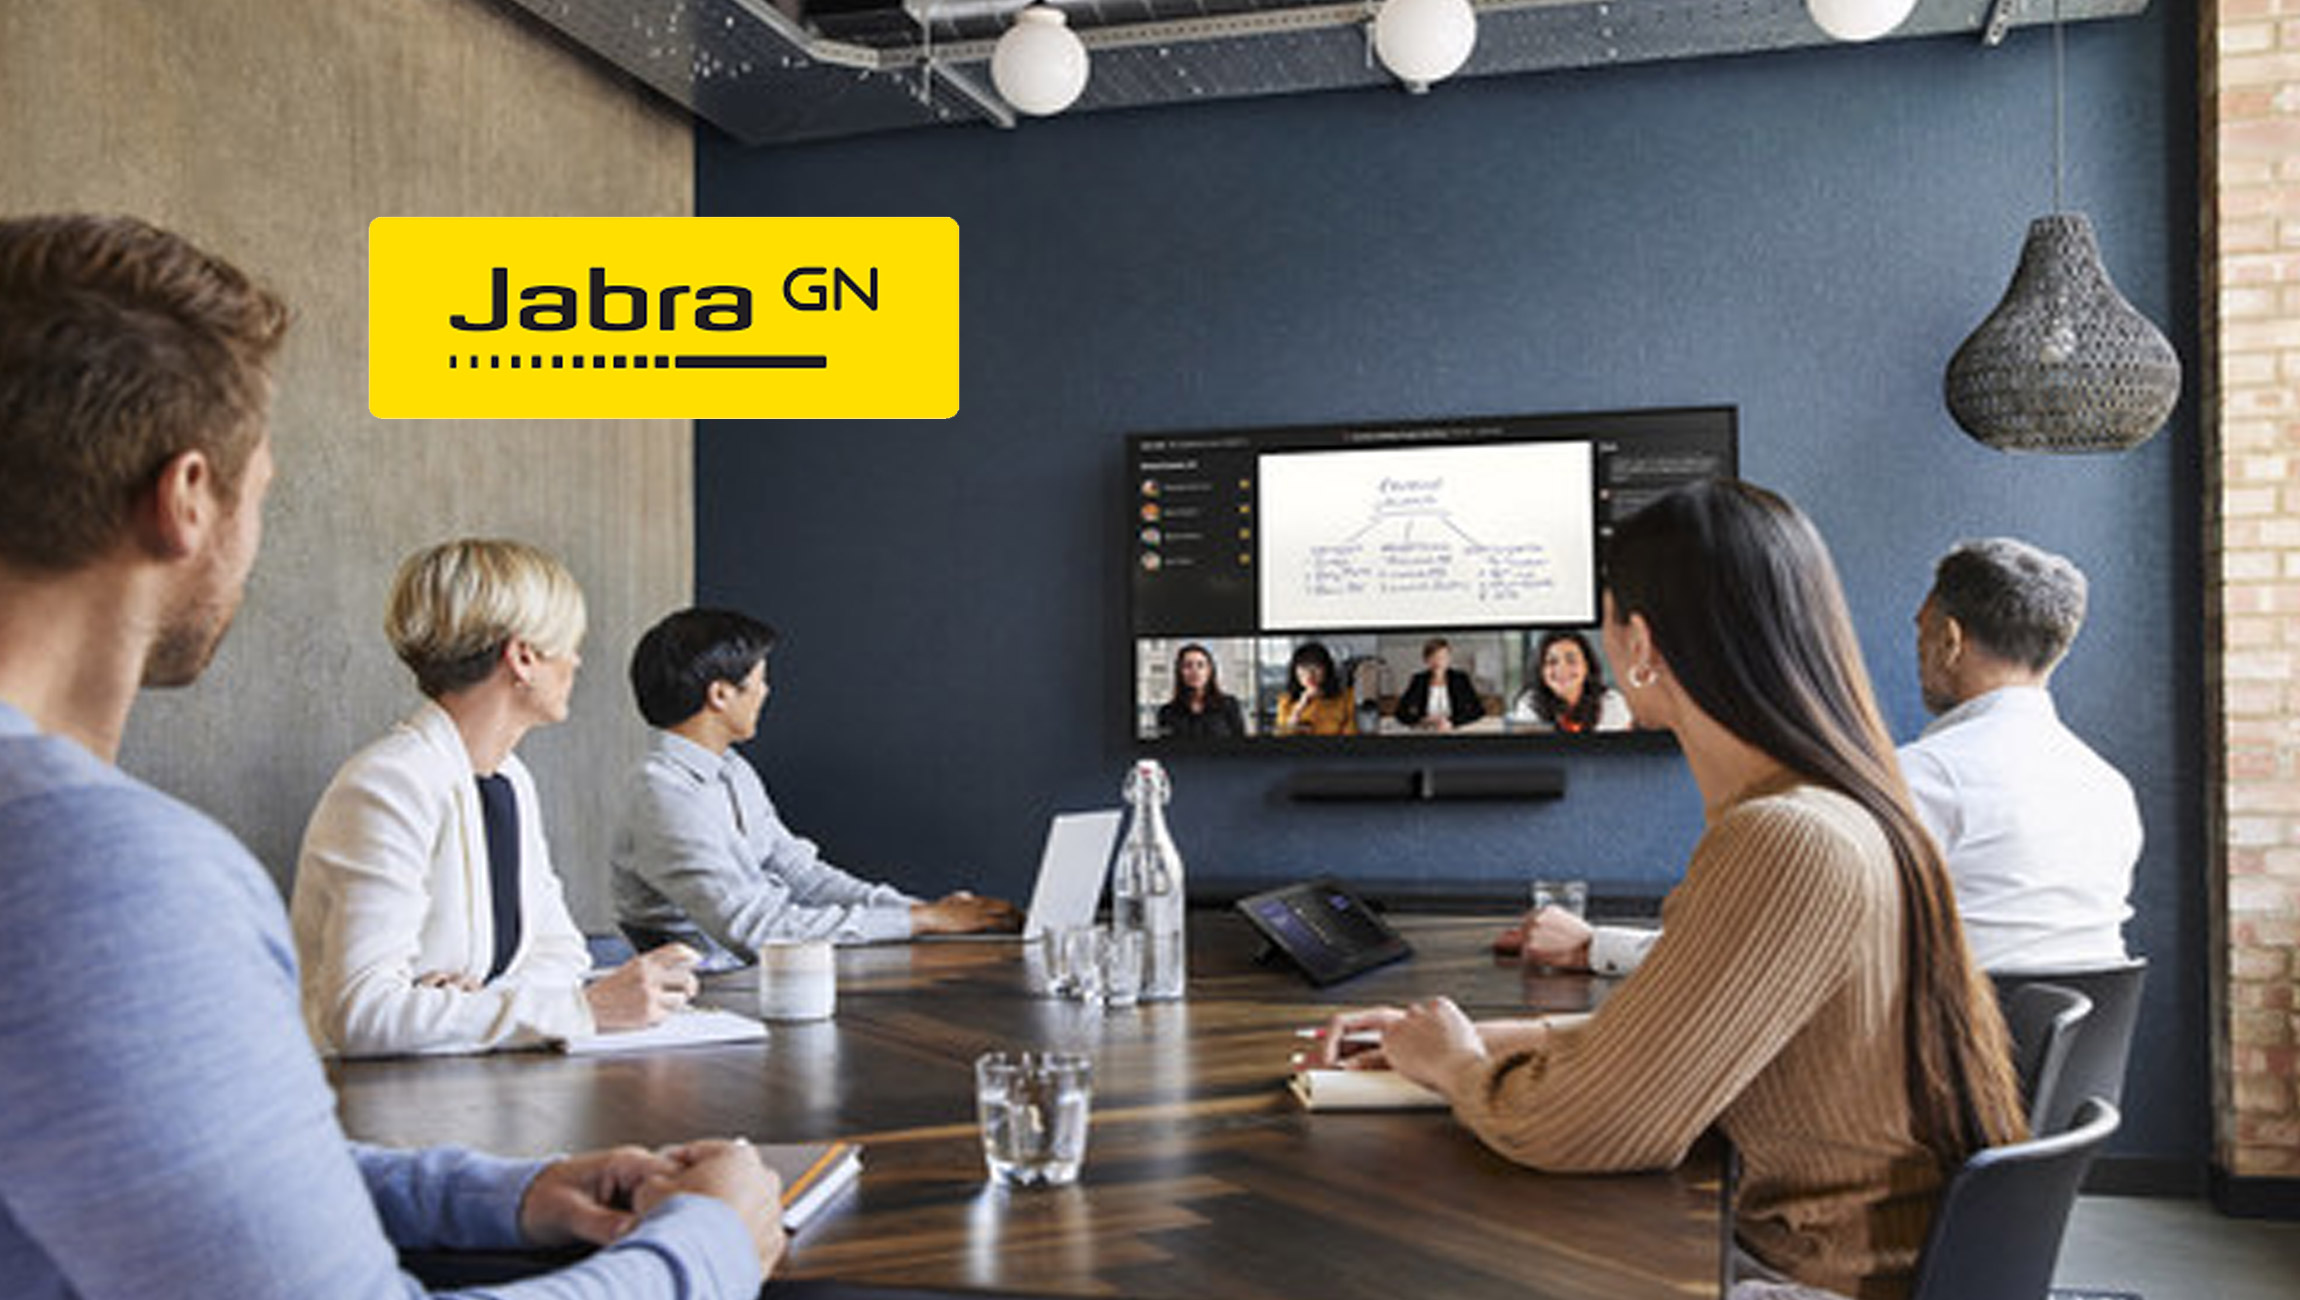 Jabra-Introduces-Dynamic-Composition-for-PanaCast-50_-Seamlessly-Bridging-Hybrid-Workers-in-Microsoft-Teams-Rooms-with-Remote-Meeting-Participants